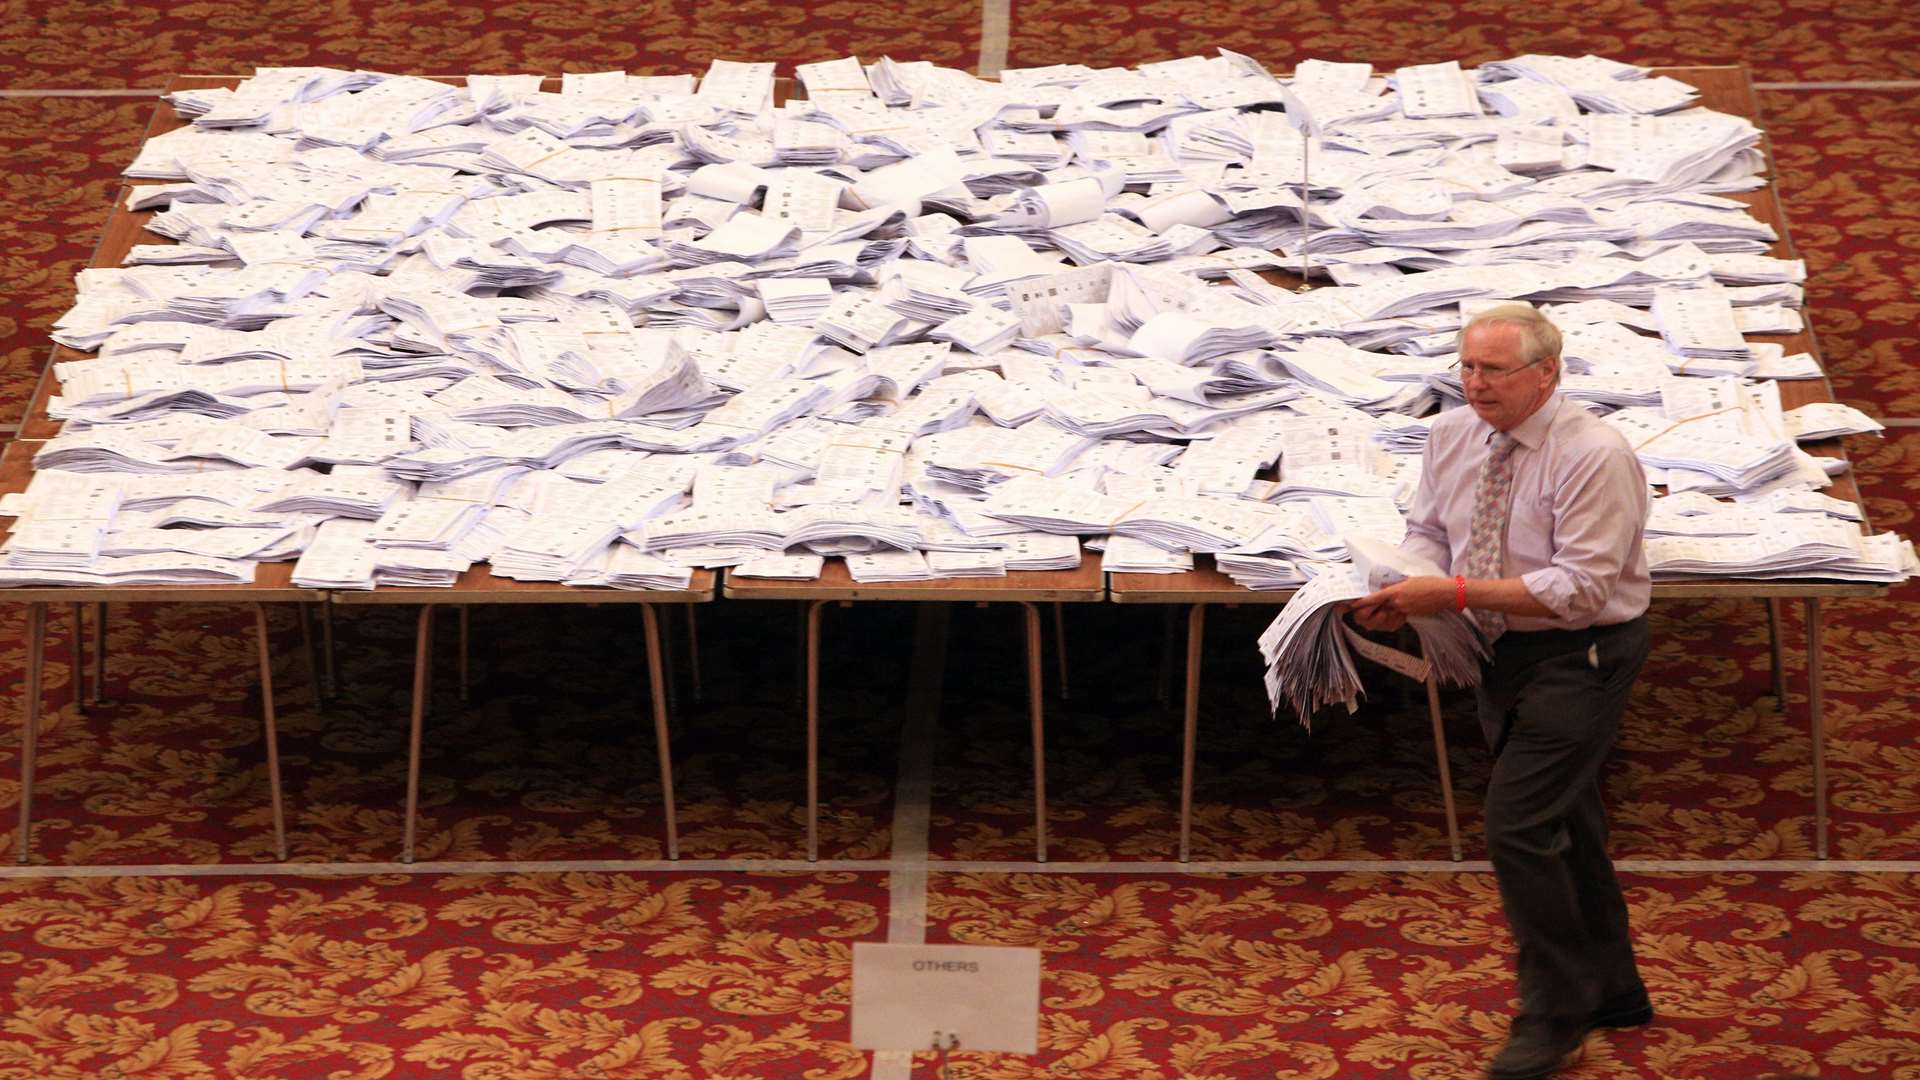 A mountain of ballots await counting in Southampton. Picture: Jon Rowley/SWNS.com